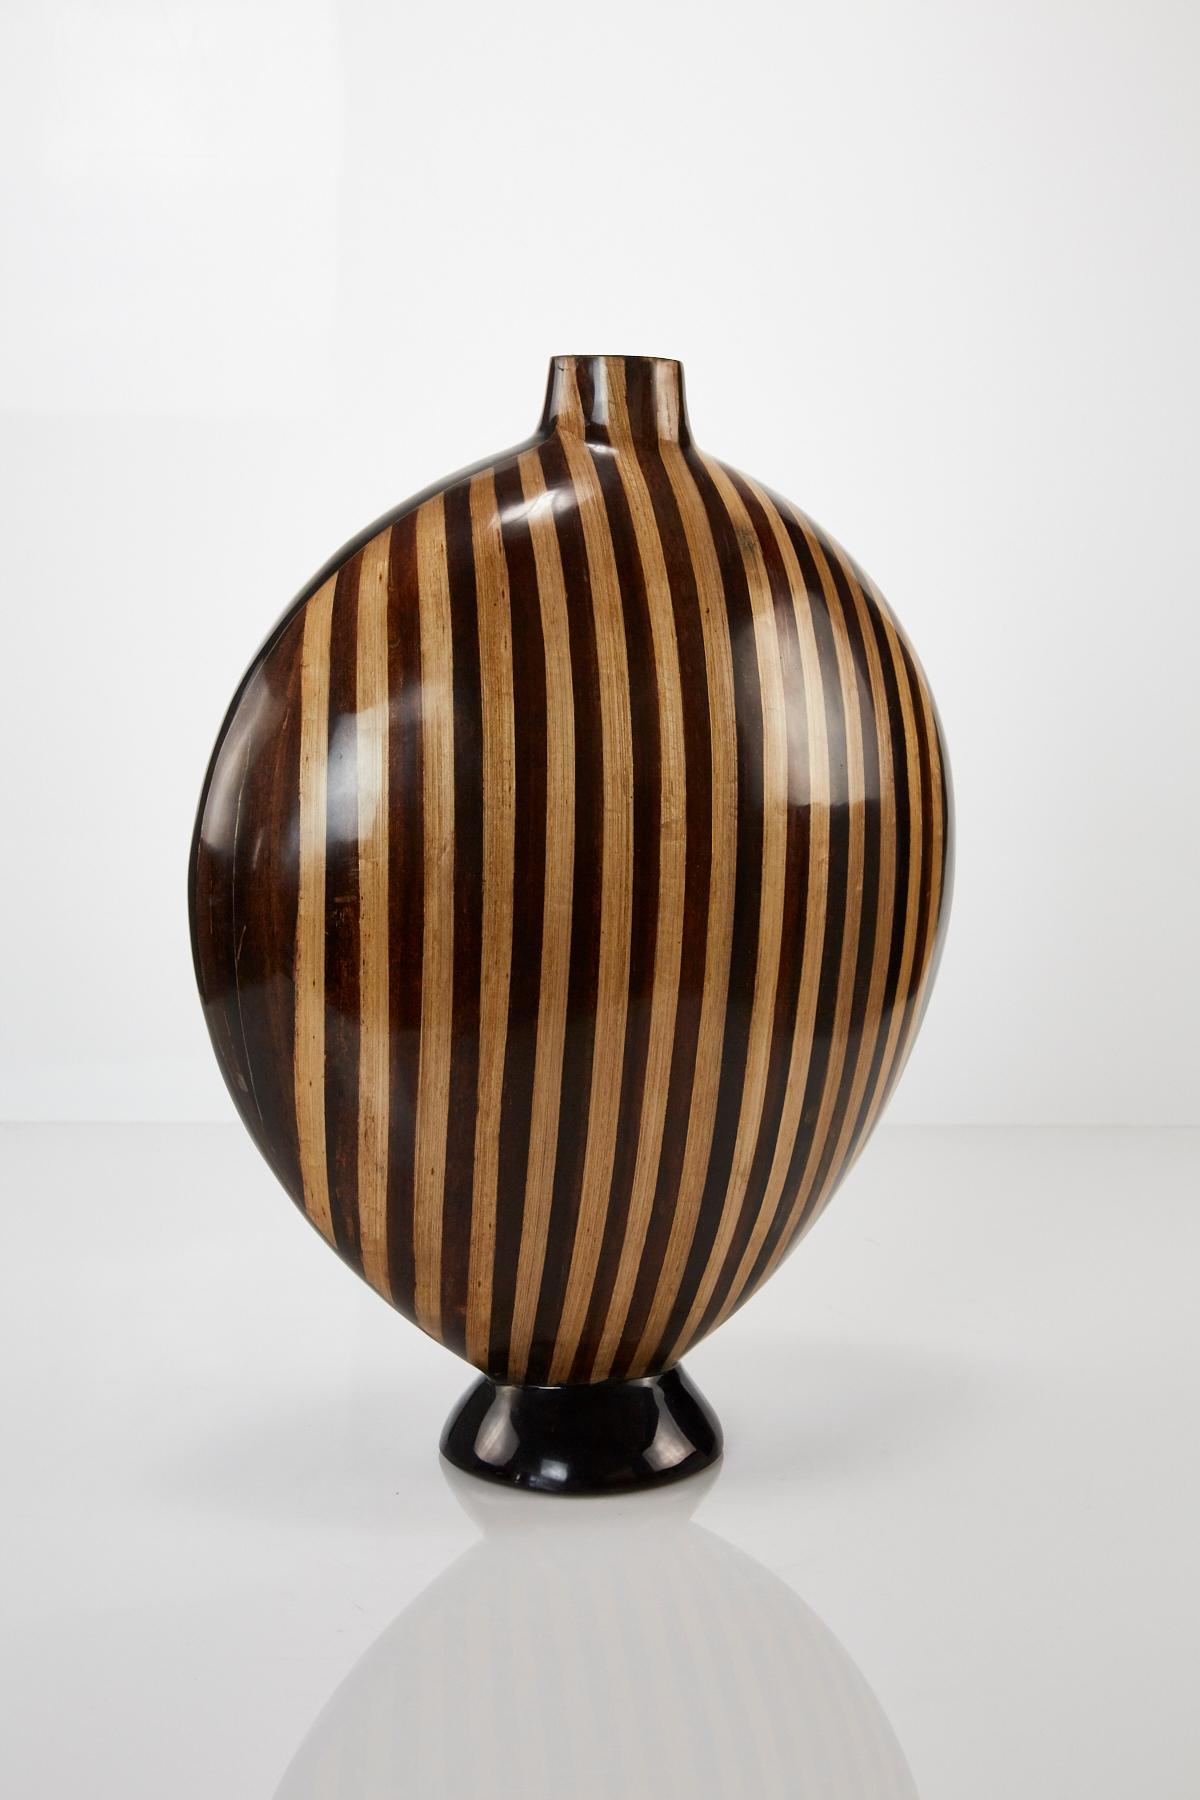 Large rounded shaped vase with black finish and decorative dark and light banana bark inlay. Asian styling.

All furnishings are made from 100% natural materials, carefully hand cut and crafted piece-by-piece and precisely inlaid to the form of the